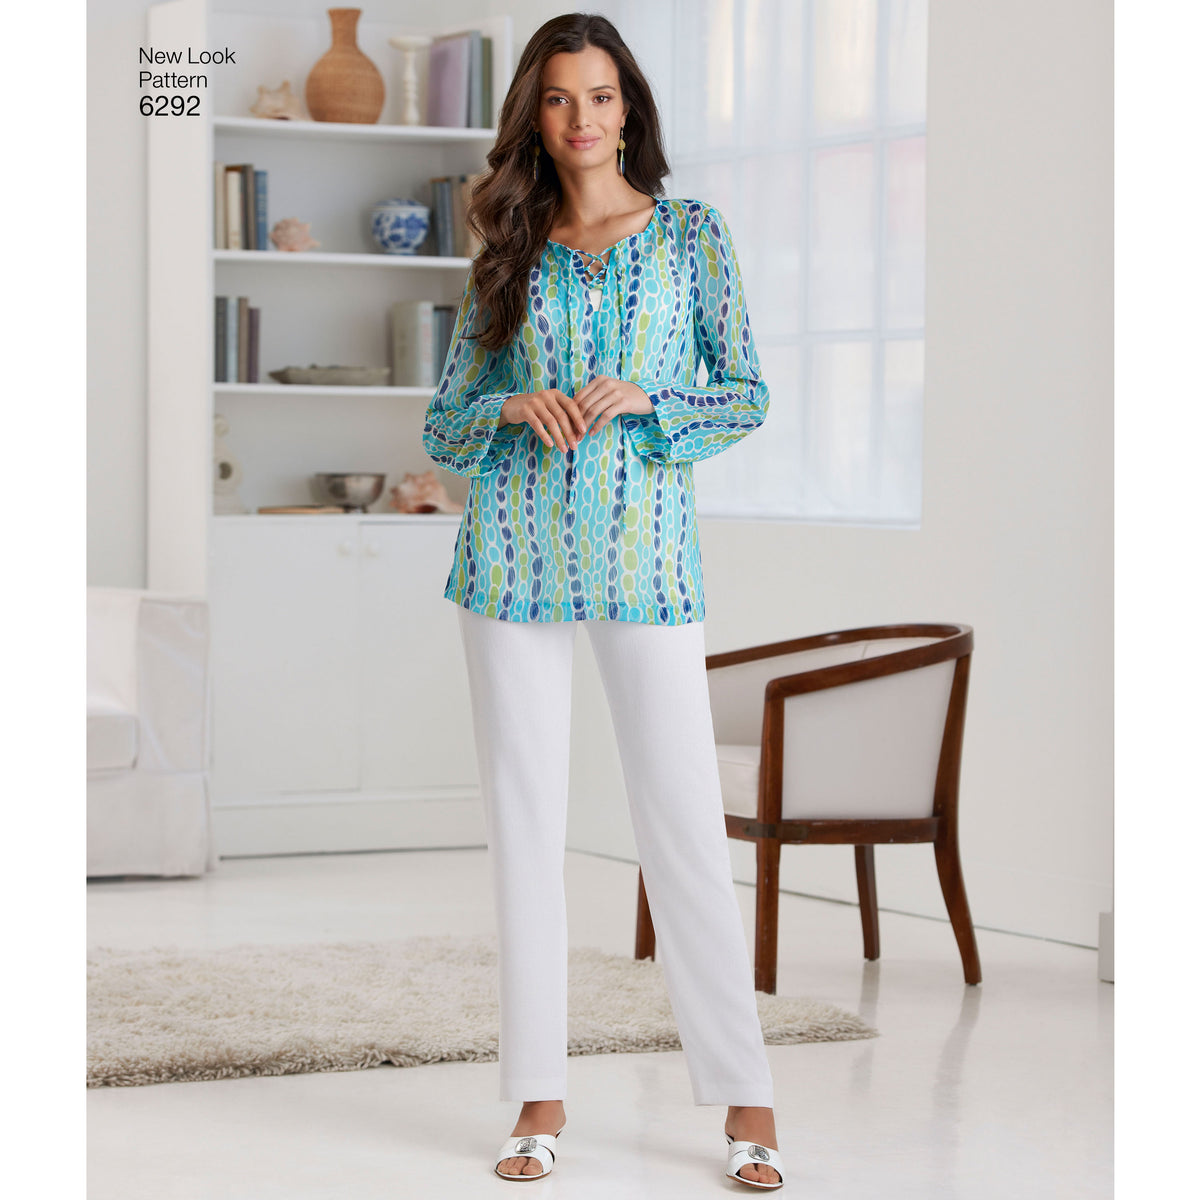 6292 Misses' Tunic or Top and Pull-on Pants